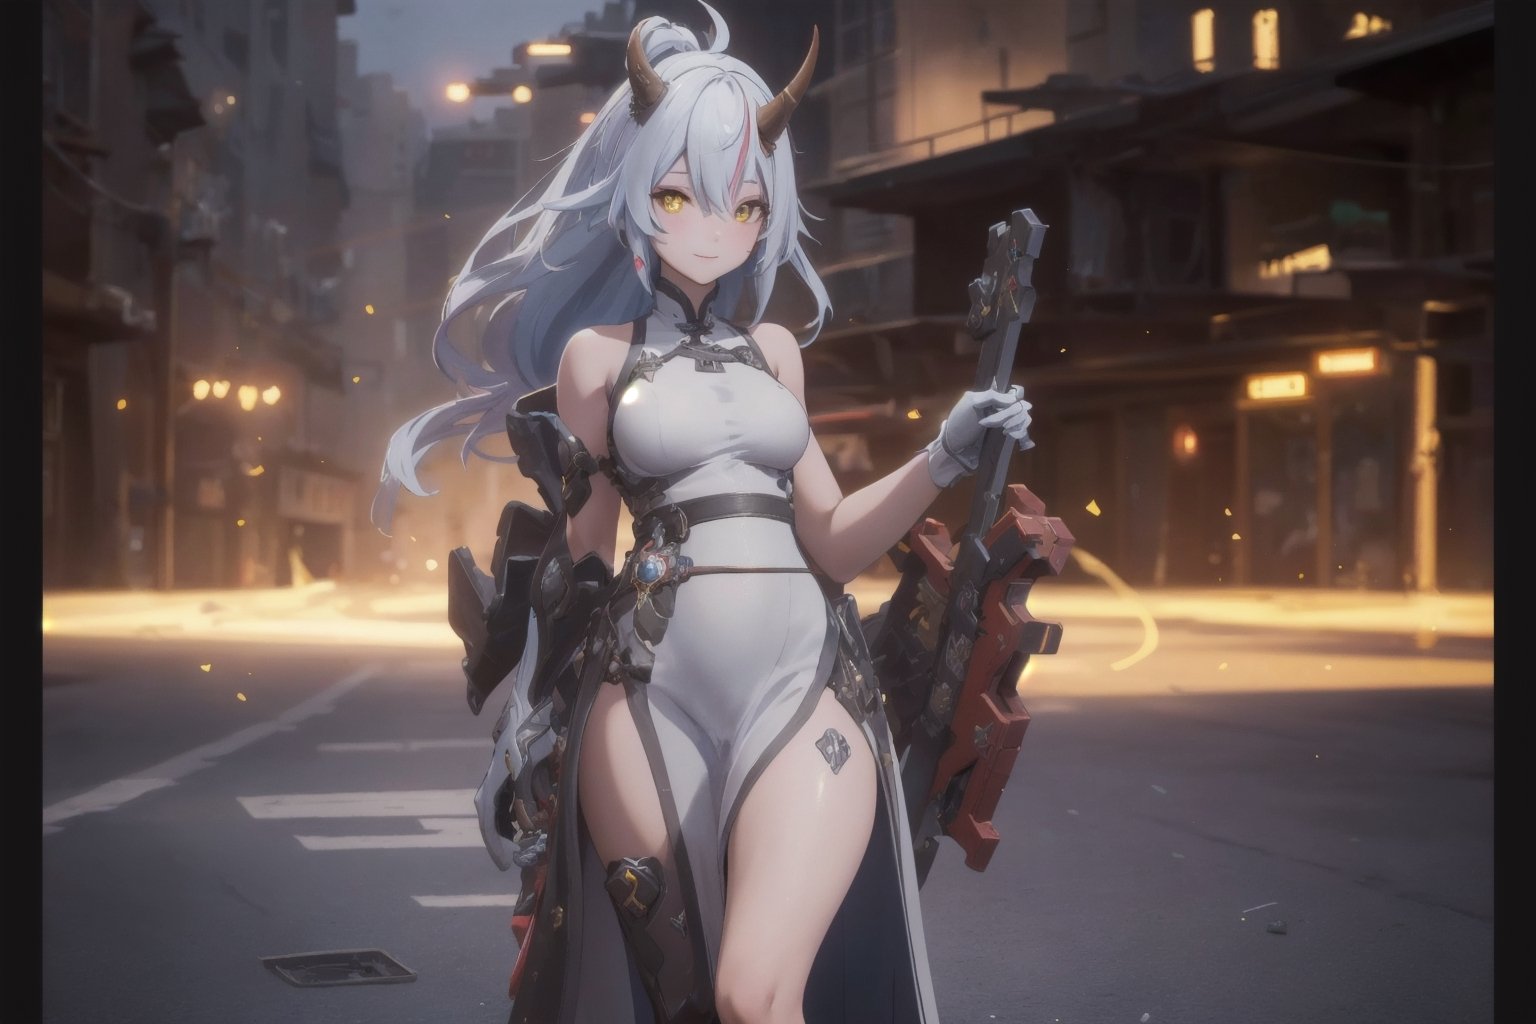 an alone mature girl with long red color slice gray hair , yellow eye, standing, china city , night time, High detail mature face, 2 short mechanic horn , iron mask, bare leg, bare shoulder, white china dress, white glove, black boot, high res, ultra sharp, 8k, masterpiece, smiling, weapon, fantasy world, magical radiance background ((Best quality)), ((masterpiece)), 3D, HDR (High Dynamic Range),Ray Tracing, NVIDIA RTX, Super-Resolution, Unreal 5,Subsurface scattering, PBR Texturing, Post-processing, Anisotropic Filtering, Depth-of-field, Maximum clarity and sharpness, Multi-layered textures, Albedo and Specular maps, Surface shading, Accurate simulation of light-material interaction, Perfect proportions, Octane Render, Two-tone lighting, Wide aperture, Low ISO, White balance, Rule of thirds,8K RAW, Aura, masterpiece, best quality, Mysterious expression, magical effects like sparkles or energy, flowing robes or enchanting attire, mechanic creatures or mystical background, rim lighting, side lighting, cinematic light, ultra high res, 8k uhd, film grain, best shadow, delicate, RAW, light particles, detailed skin texture, detailed cloth texture, beautiful face, (masterpiece), best quality, expressive eyes, perfect face,mecha musume